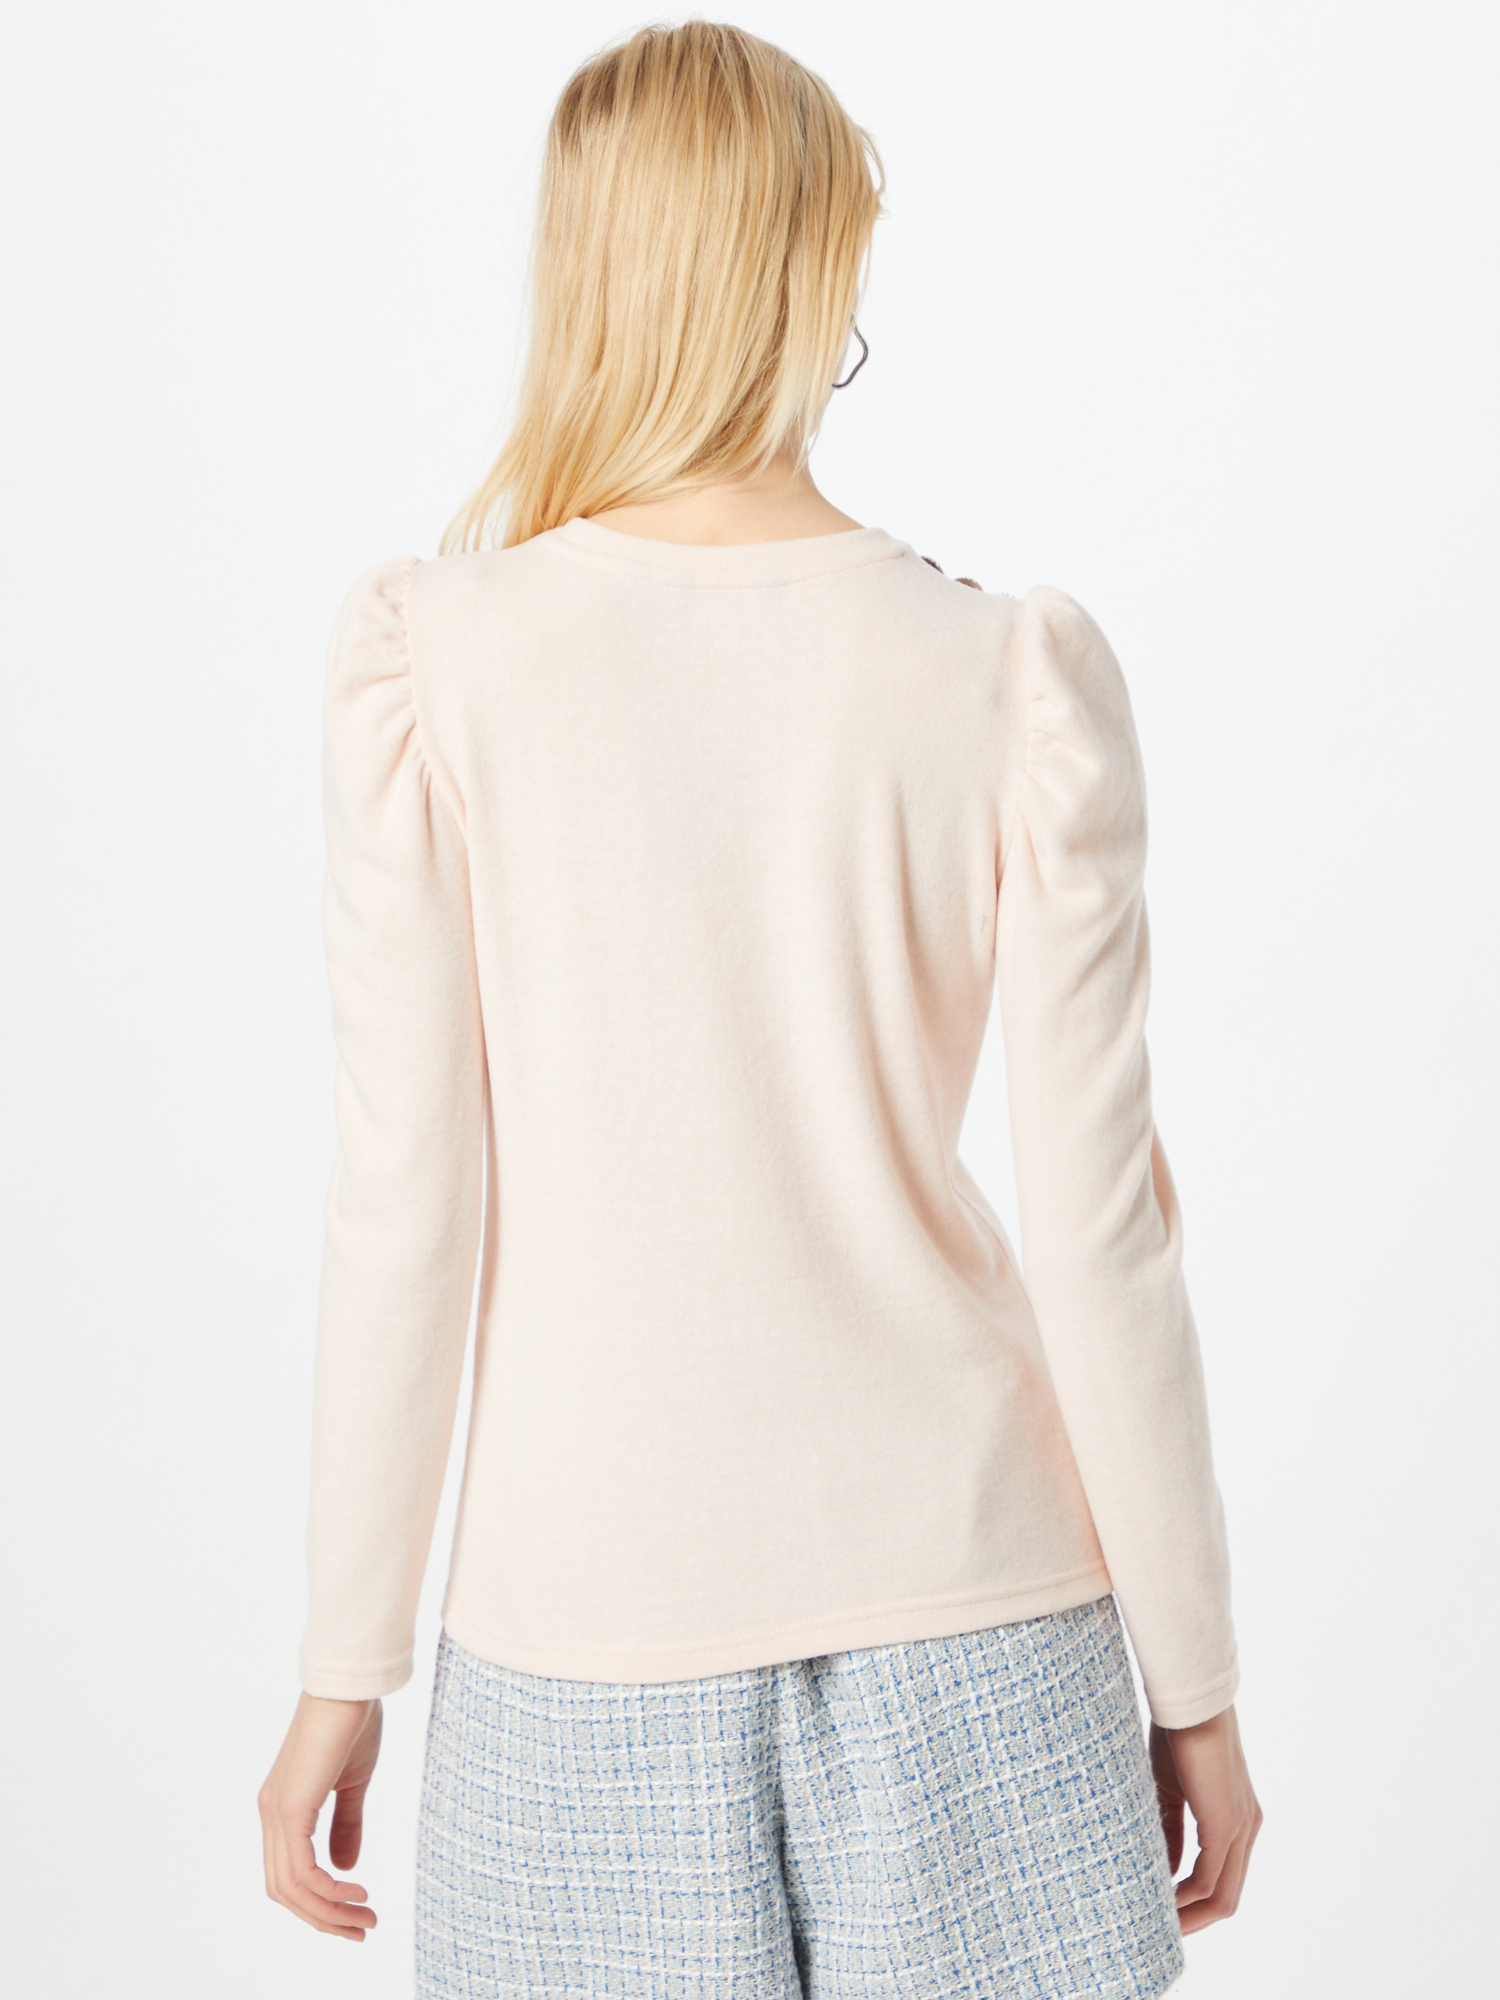 Taglie comode Lpcxy Dorothy Perkins Pullover in Rosa Pastello 